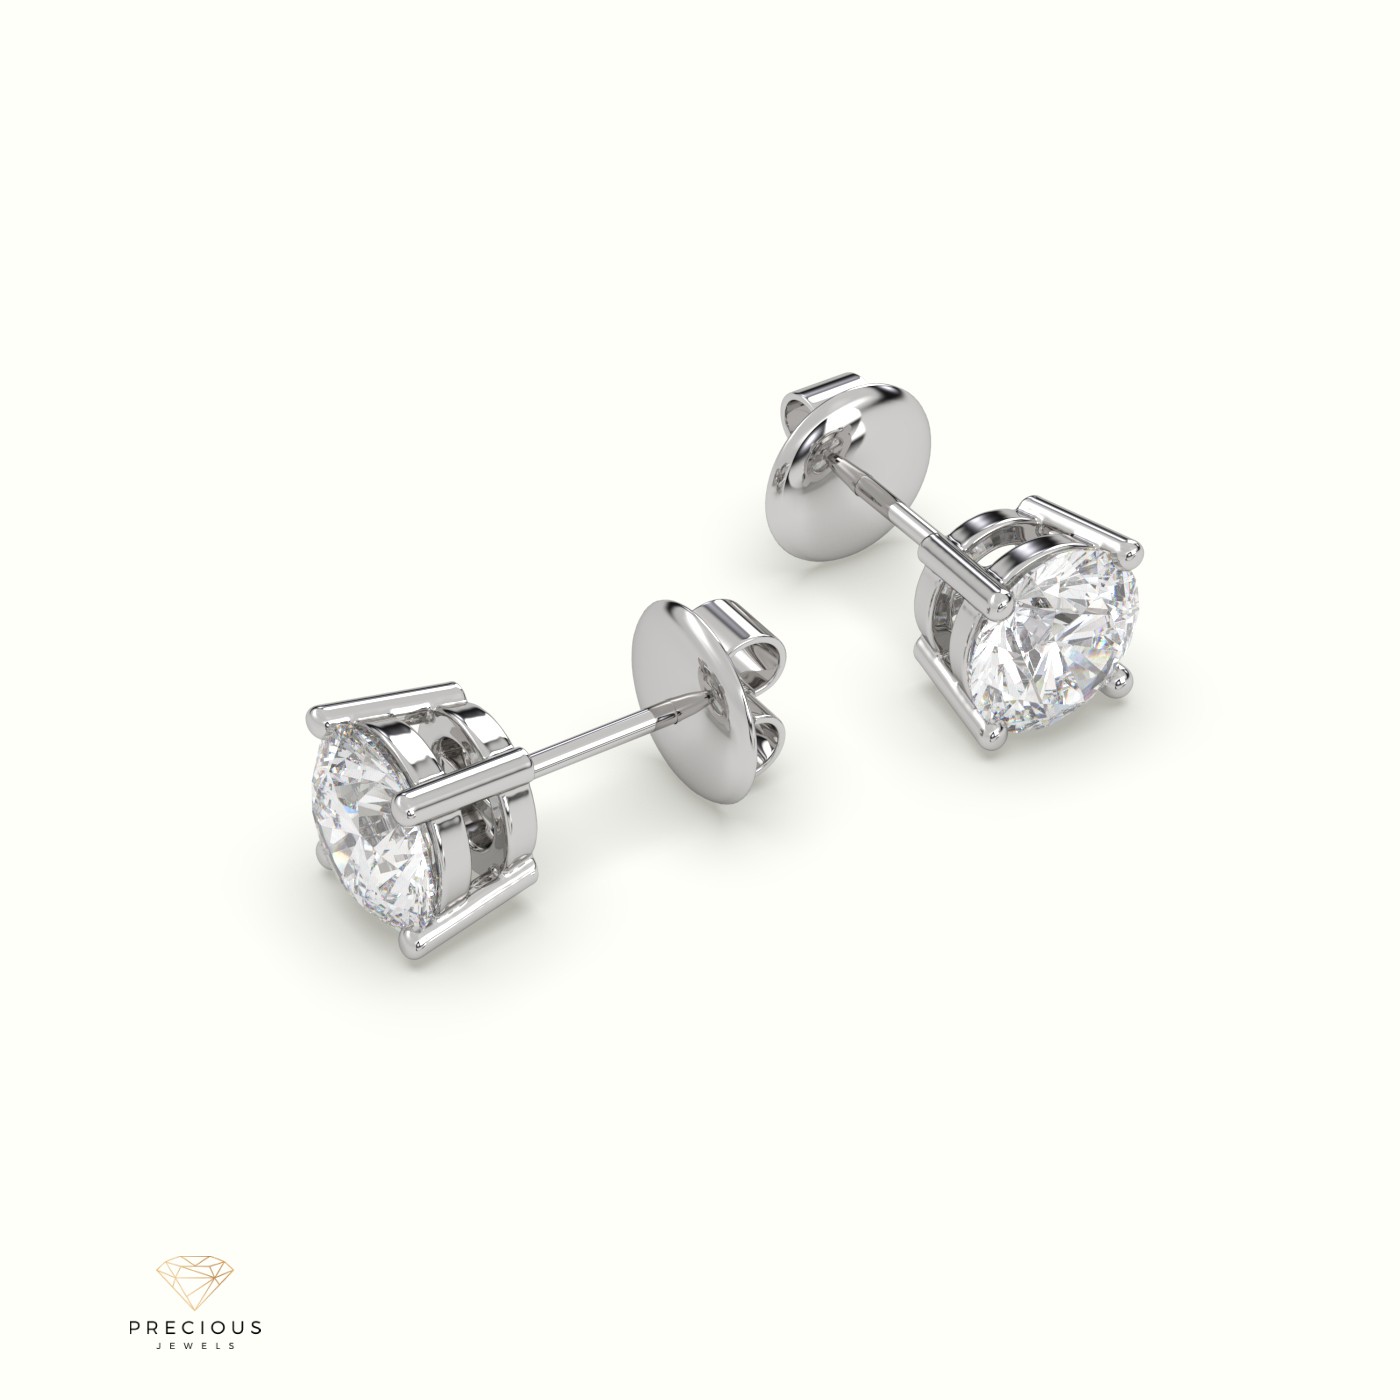 18k white gold  4 prongs classic round diamond earring studs Photos & images